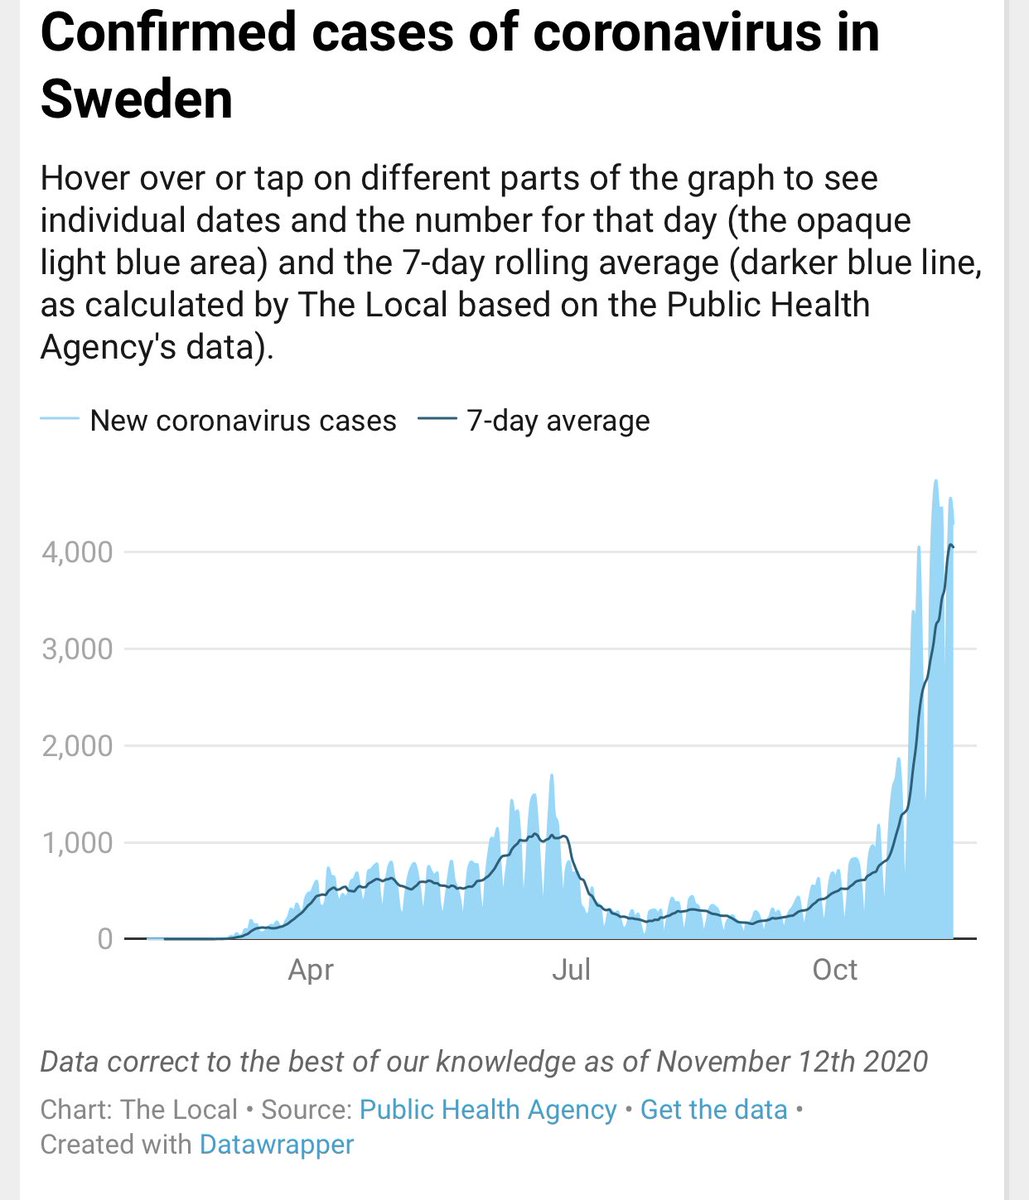 2) This is a dramatic shift in tone from Sweden before. Sweden epidemic surge is just too hot now. Higher than its neighbors, despite previous predictions of greater herd immunity. Didn’t pan out.